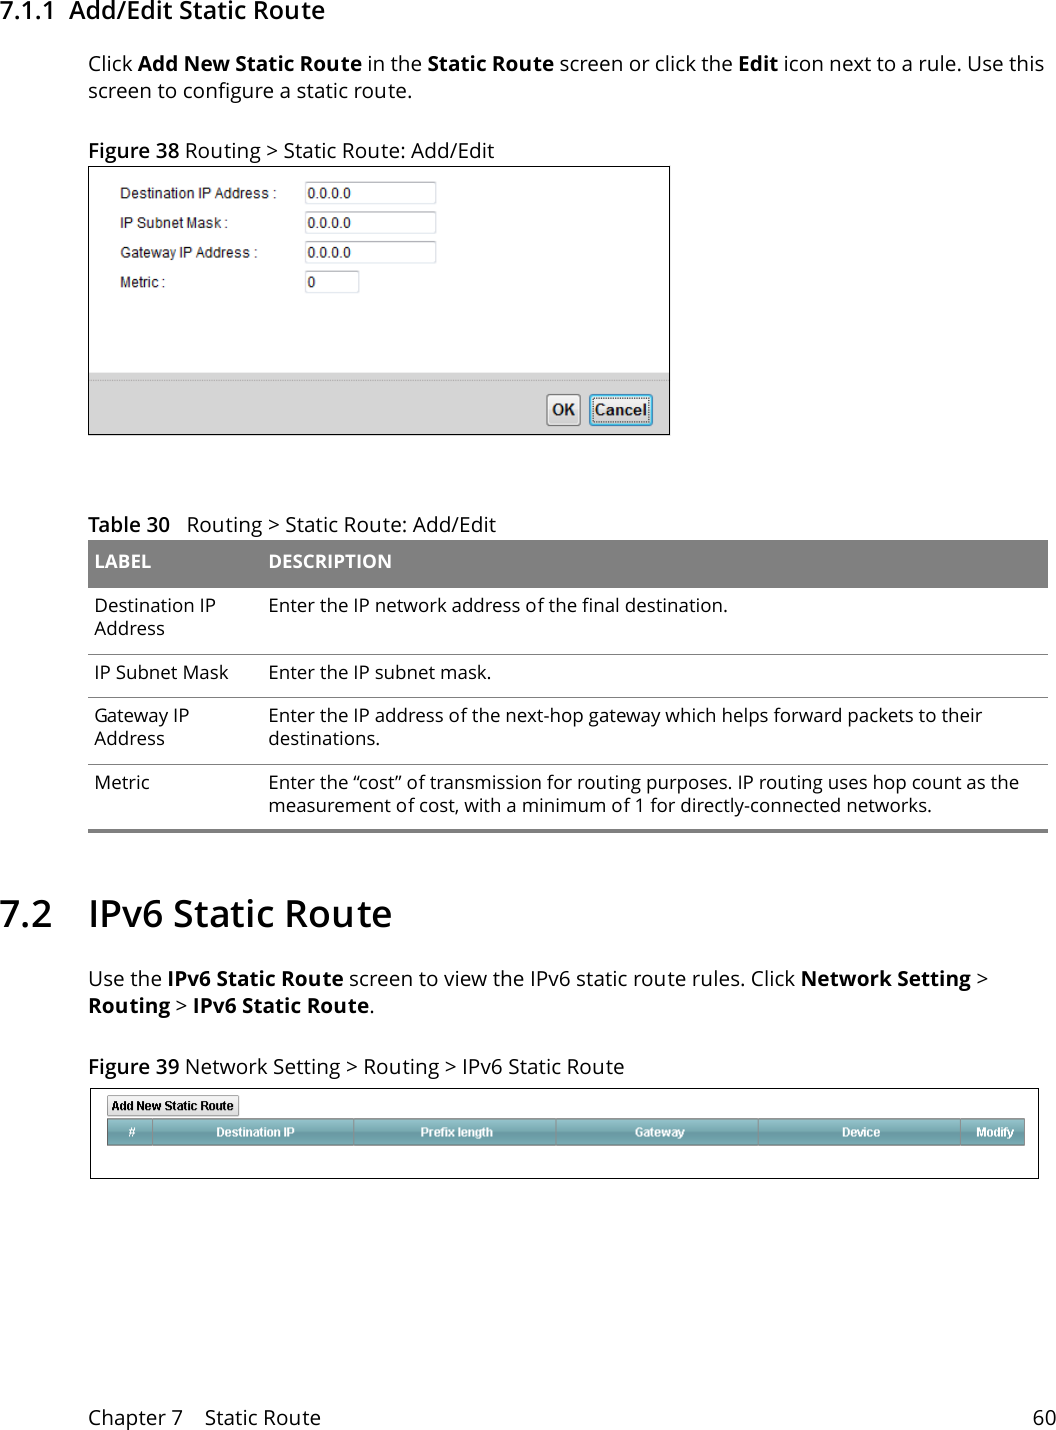 Chapter 7    Static Route 607.1.1  Add/Edit Static Route   Click Add New Static Route in the Static Route screen or click the Edit icon next to a rule. Use this screen to configure a static route.Figure 38 Routing &gt; Static Route: Add/EditTable 30   Routing &gt; Static Route: Add/Edit LABEL DESCRIPTIONDestination IP AddressEnter the IP network address of the final destination. IP Subnet Mask  Enter the IP subnet mask.Gateway IP AddressEnter the IP address of the next-hop gateway which helps forward packets to their destinations.Metric Enter the “cost” of transmission for routing purposes. IP routing uses hop count as the measurement of cost, with a minimum of 1 for directly-connected networks.7.2   IPv6 Static RouteUse the IPv6 Static Route screen to view the IPv6 static route rules. Click Network Setting &gt; Routing &gt; IPv6 Static Route.Figure 39 Network Setting &gt; Routing &gt; IPv6 Static Route